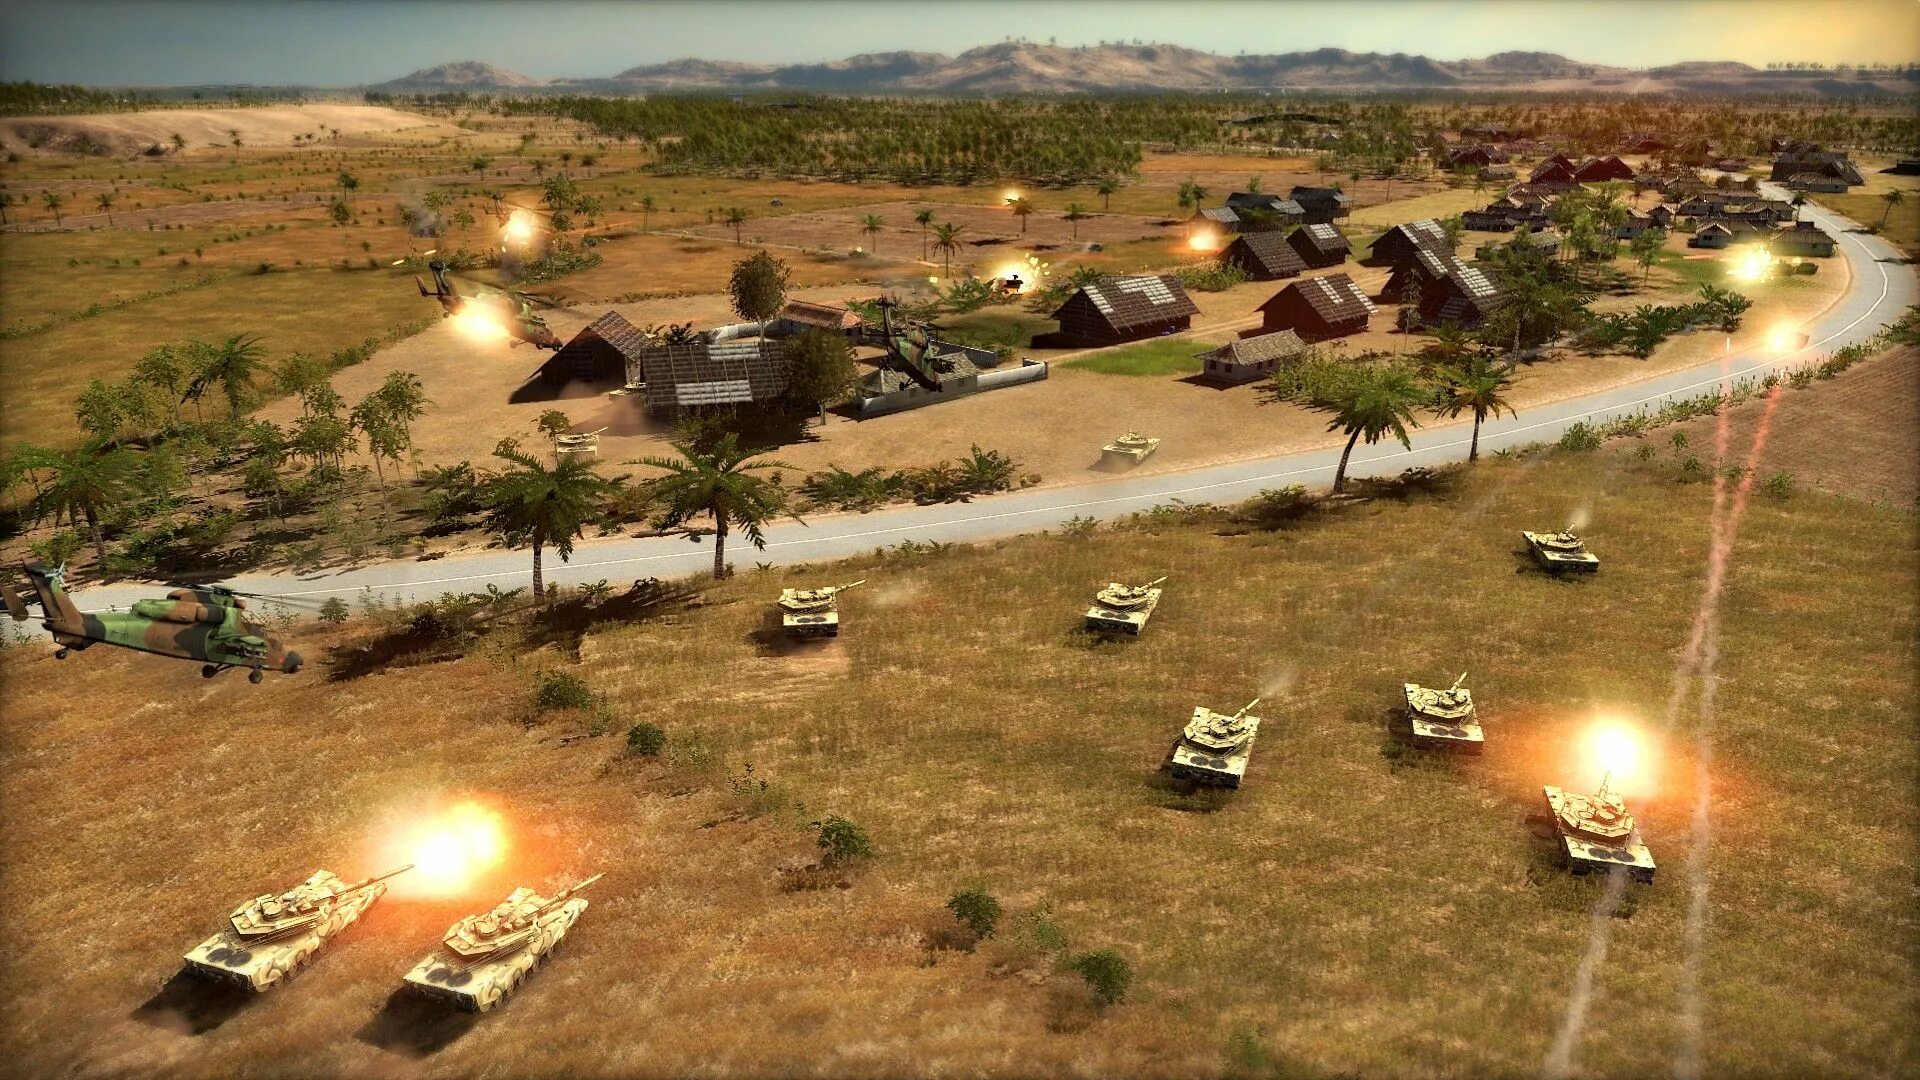 Игра Wargame Red Dragon. Wargame Red Dragon Eugen Systems. Wargame Red Dragon ПЗРК. Wargame: Red Dragon (2014).